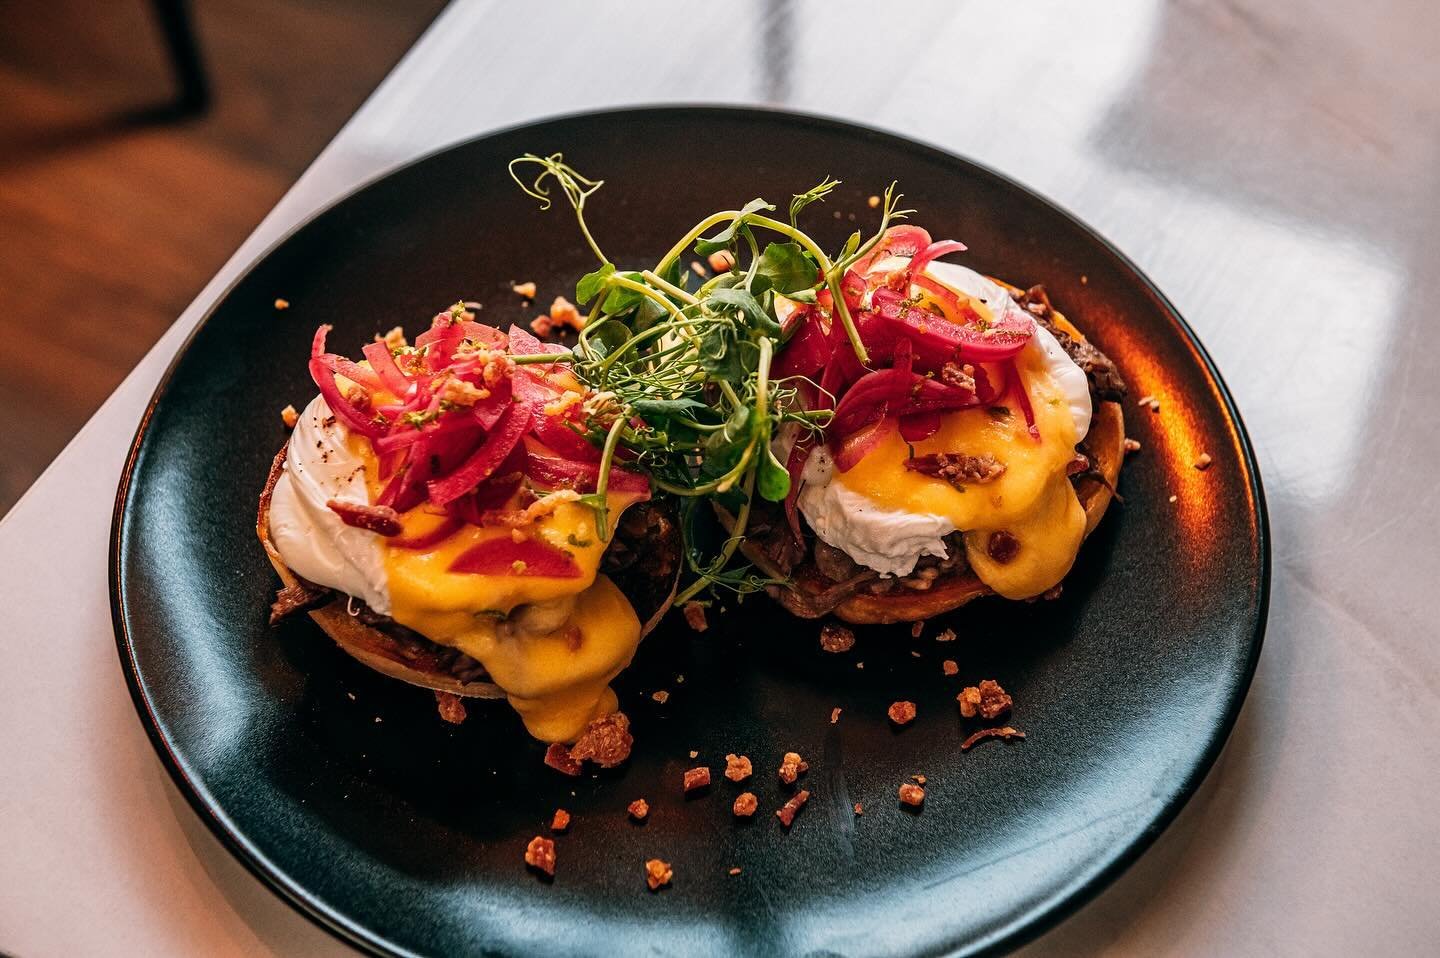 NEW BRUNCH MENU - SATURDAYS ONLY (for the moment 👀)

With the release of our new evening menu, we have a delicious new brunch menu launching this week too.

Books or between 12pm &amp; 4pm on Saturdays for both bottomless brunch and normal dining.

